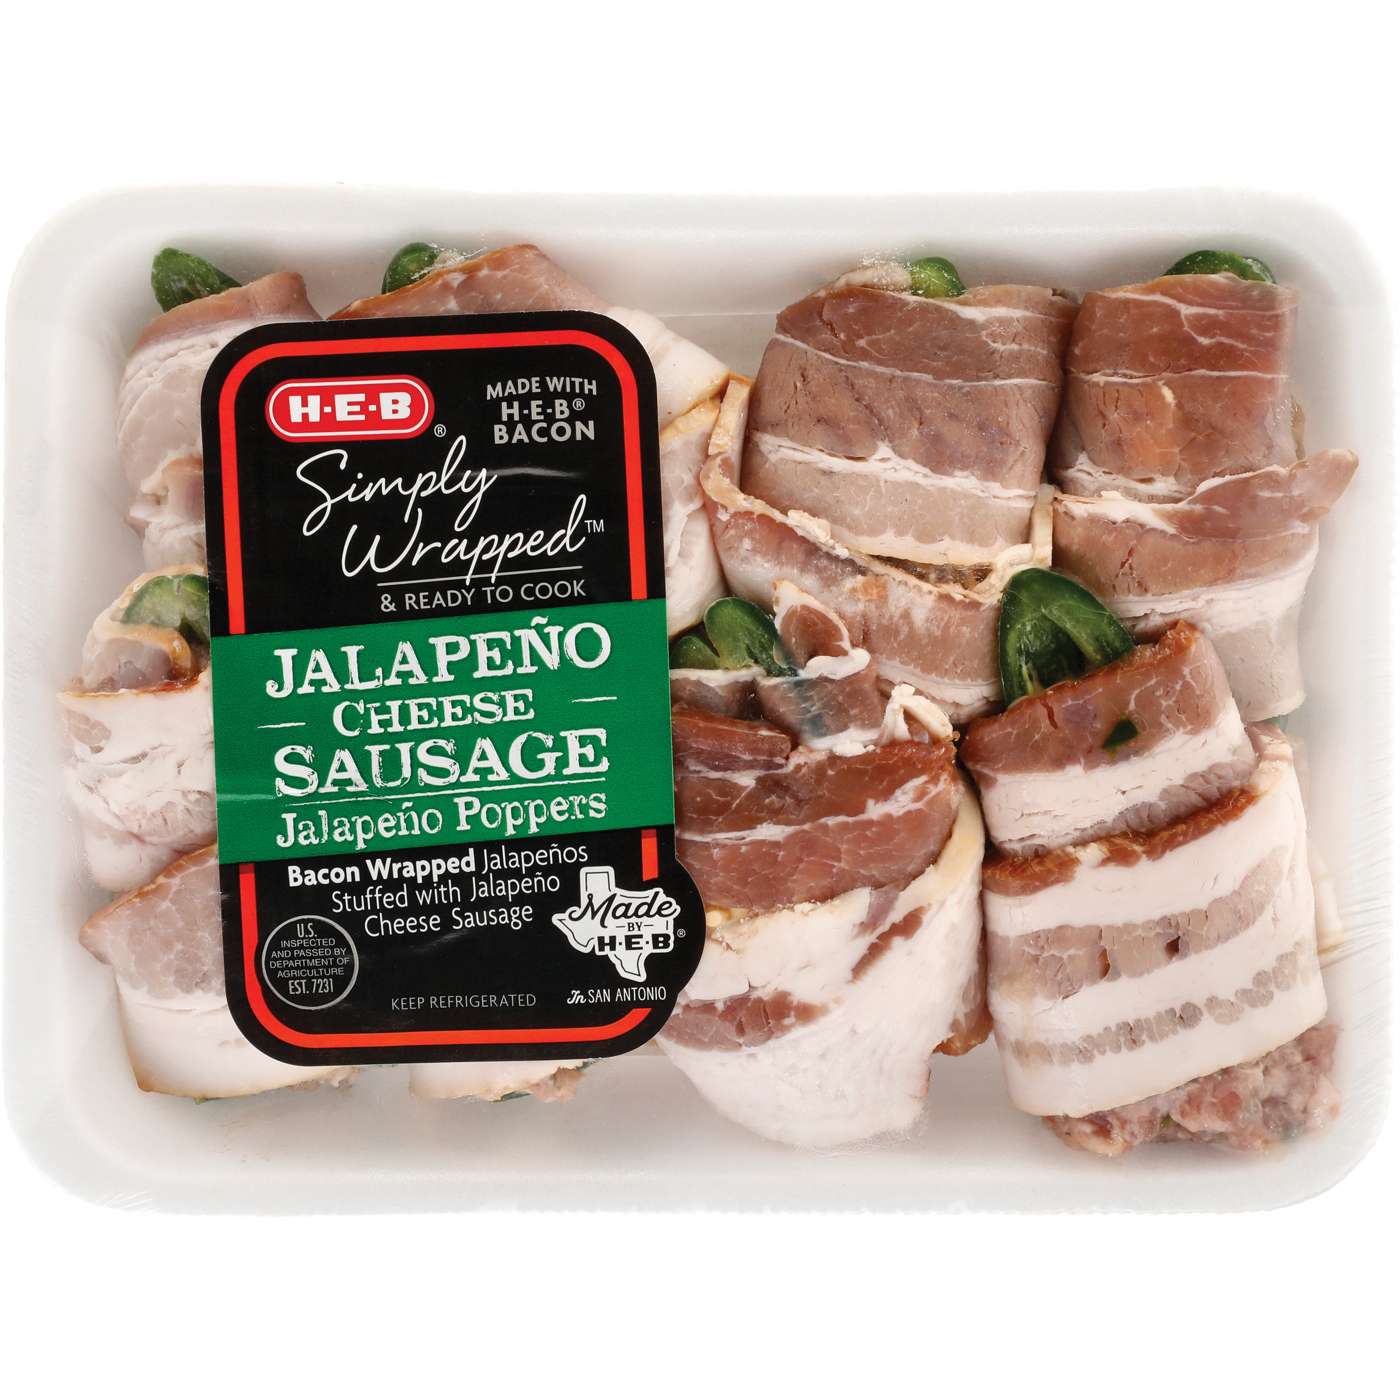 H-E-B Simply Wrapped Jalapeno Cheese Sausage Jalapeno Poppers; image 1 of 2